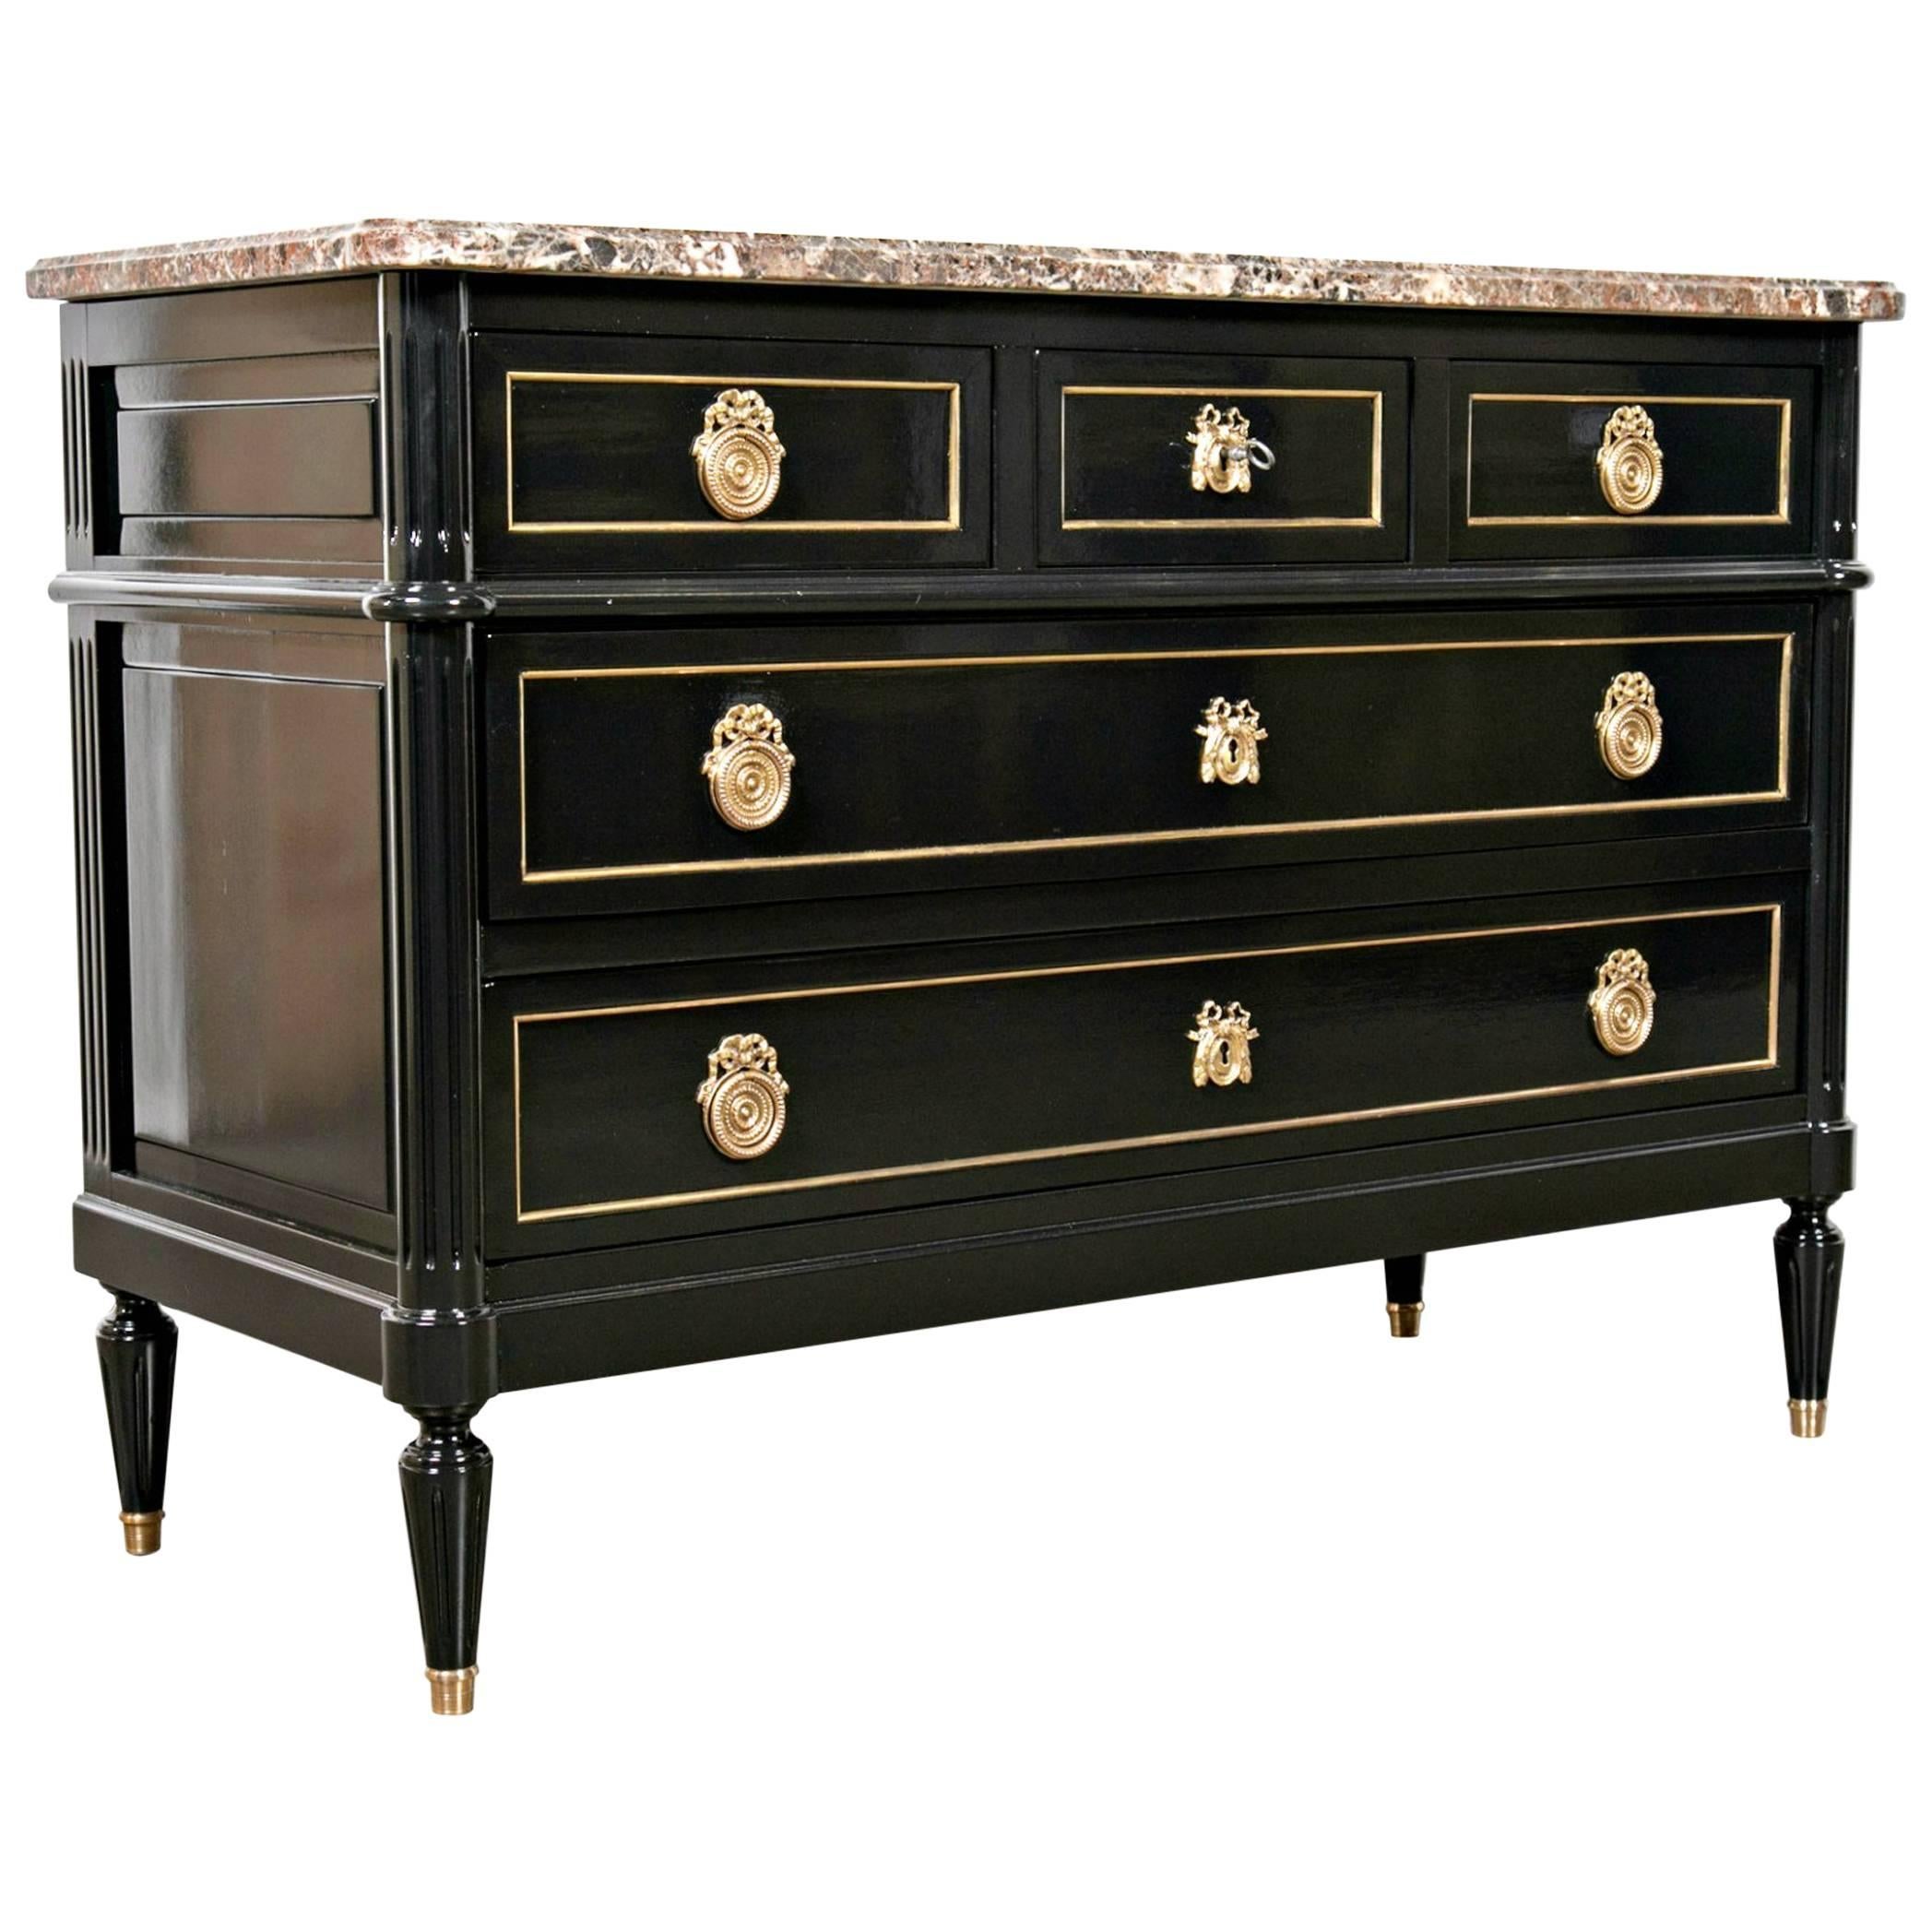 Louis XVI Style Maison Jansen Commode with Marble Top